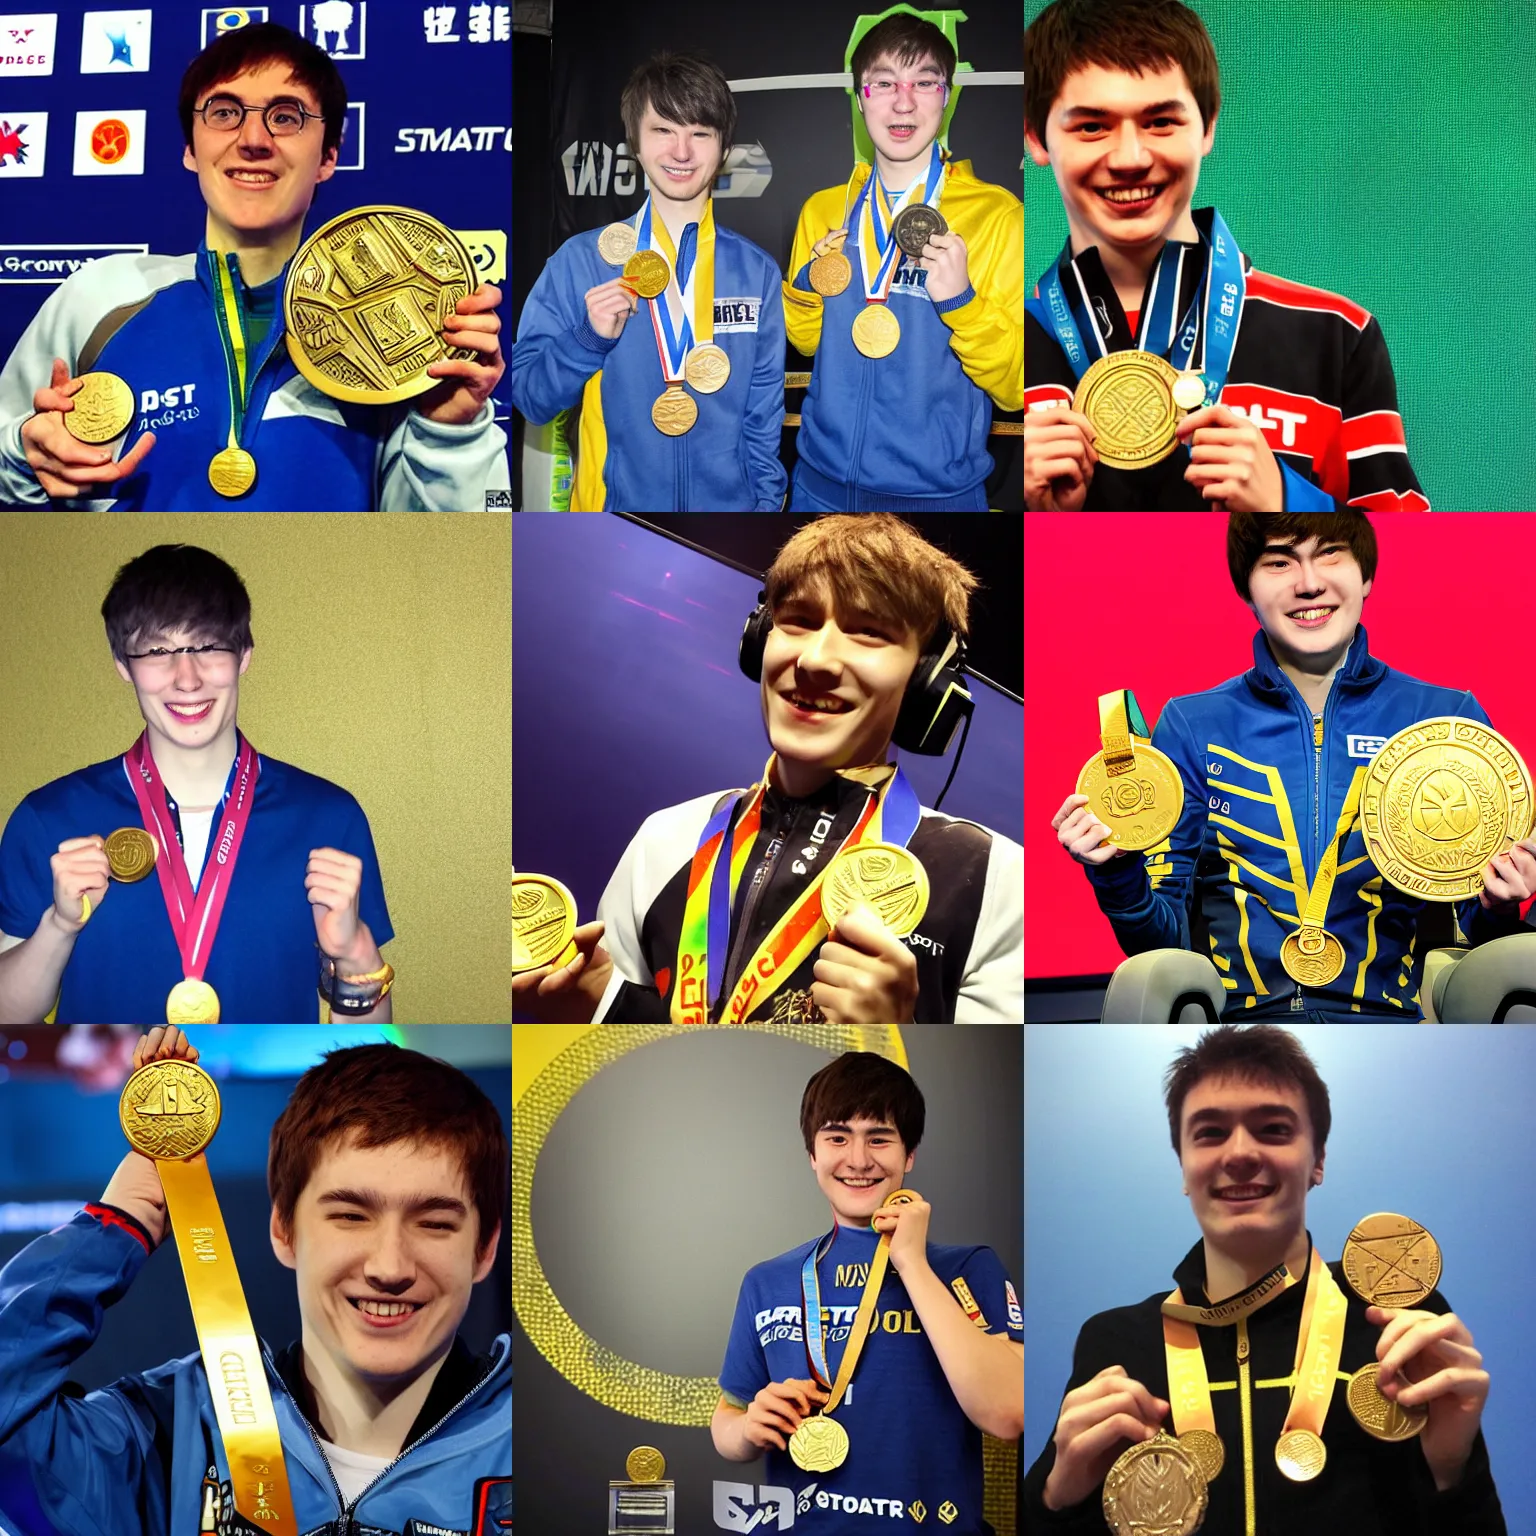 Prompt: the world greatest starcraft player, holding a gold medal and smiling